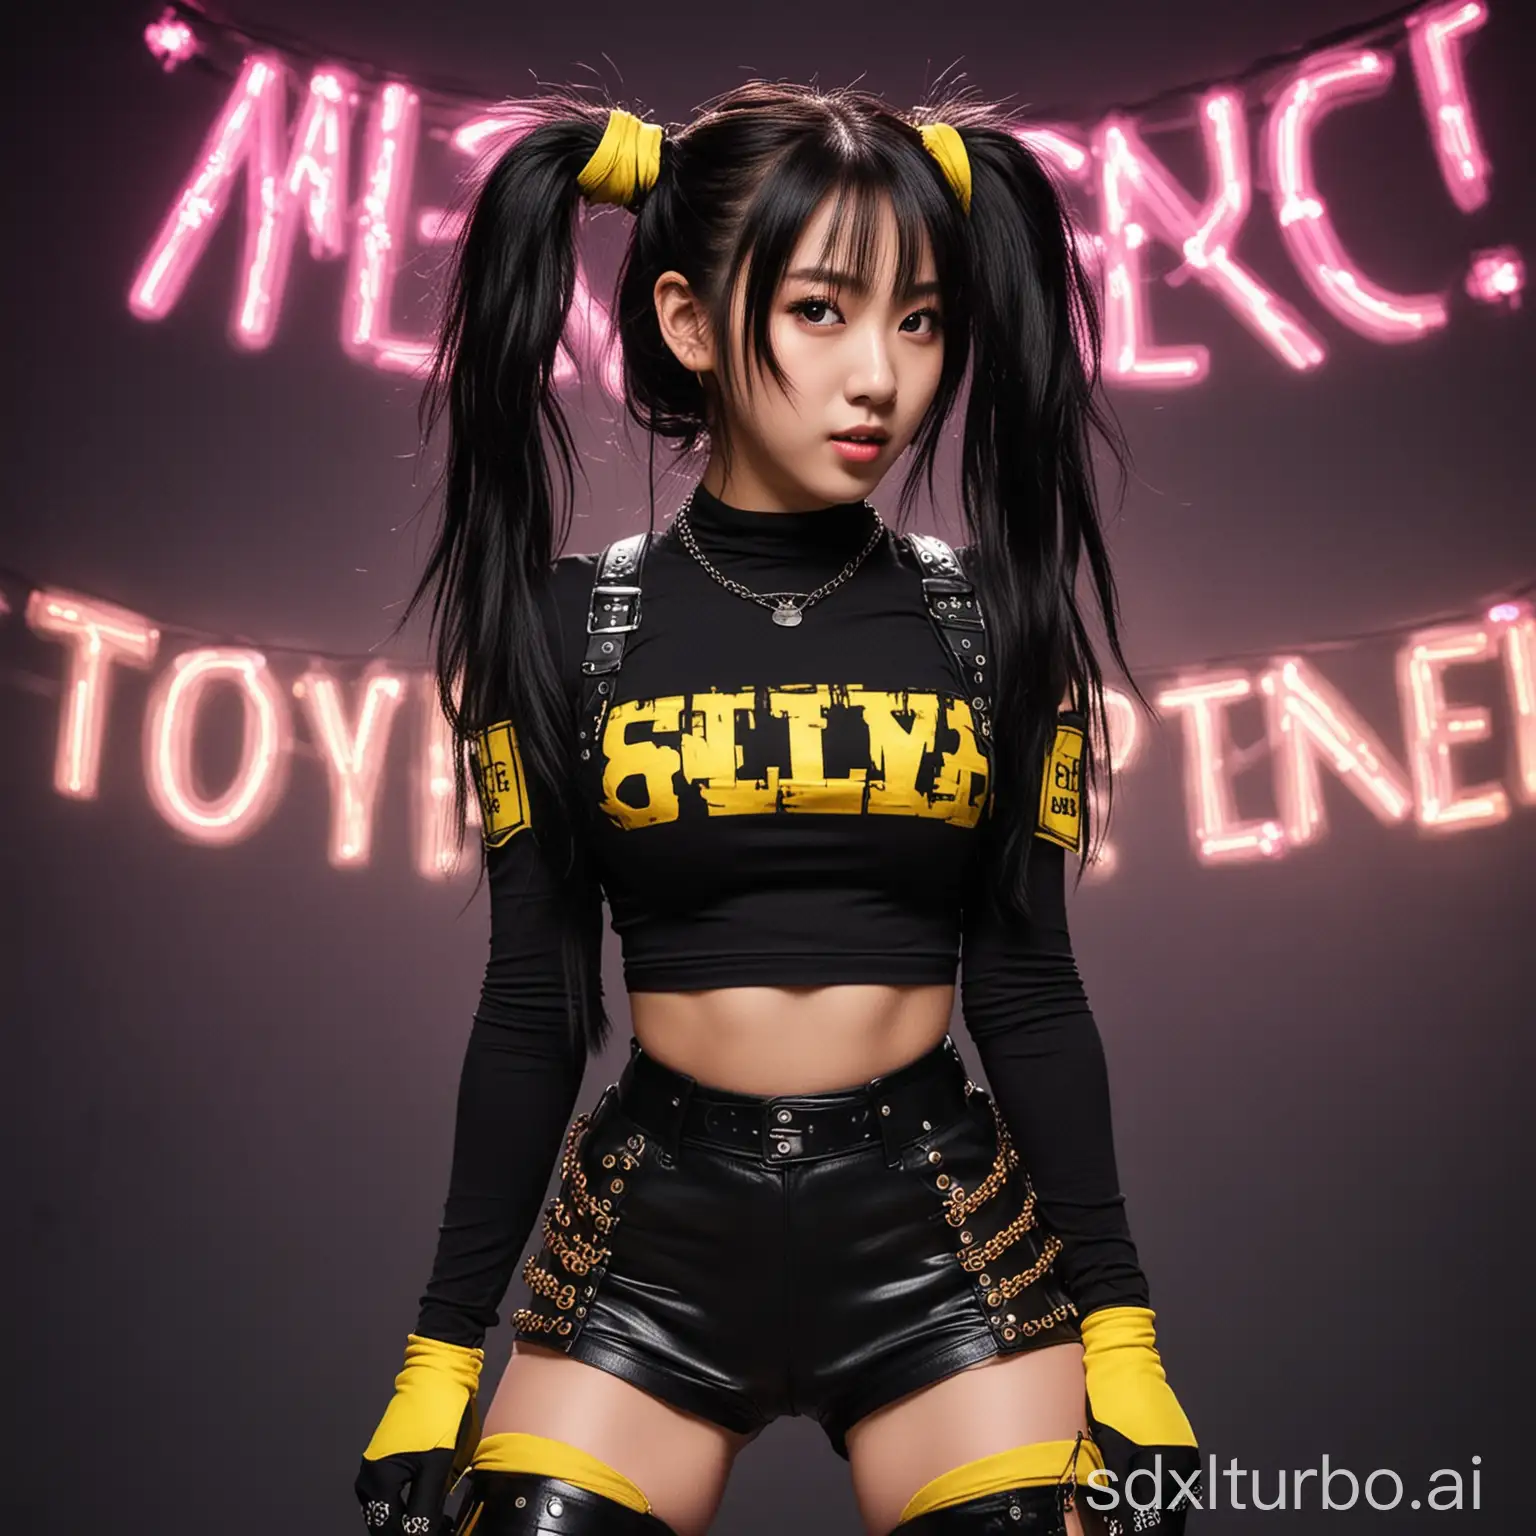 Kpop-Girl-on-Stage-with-Colorful-Lights-and-Neon-Lettering